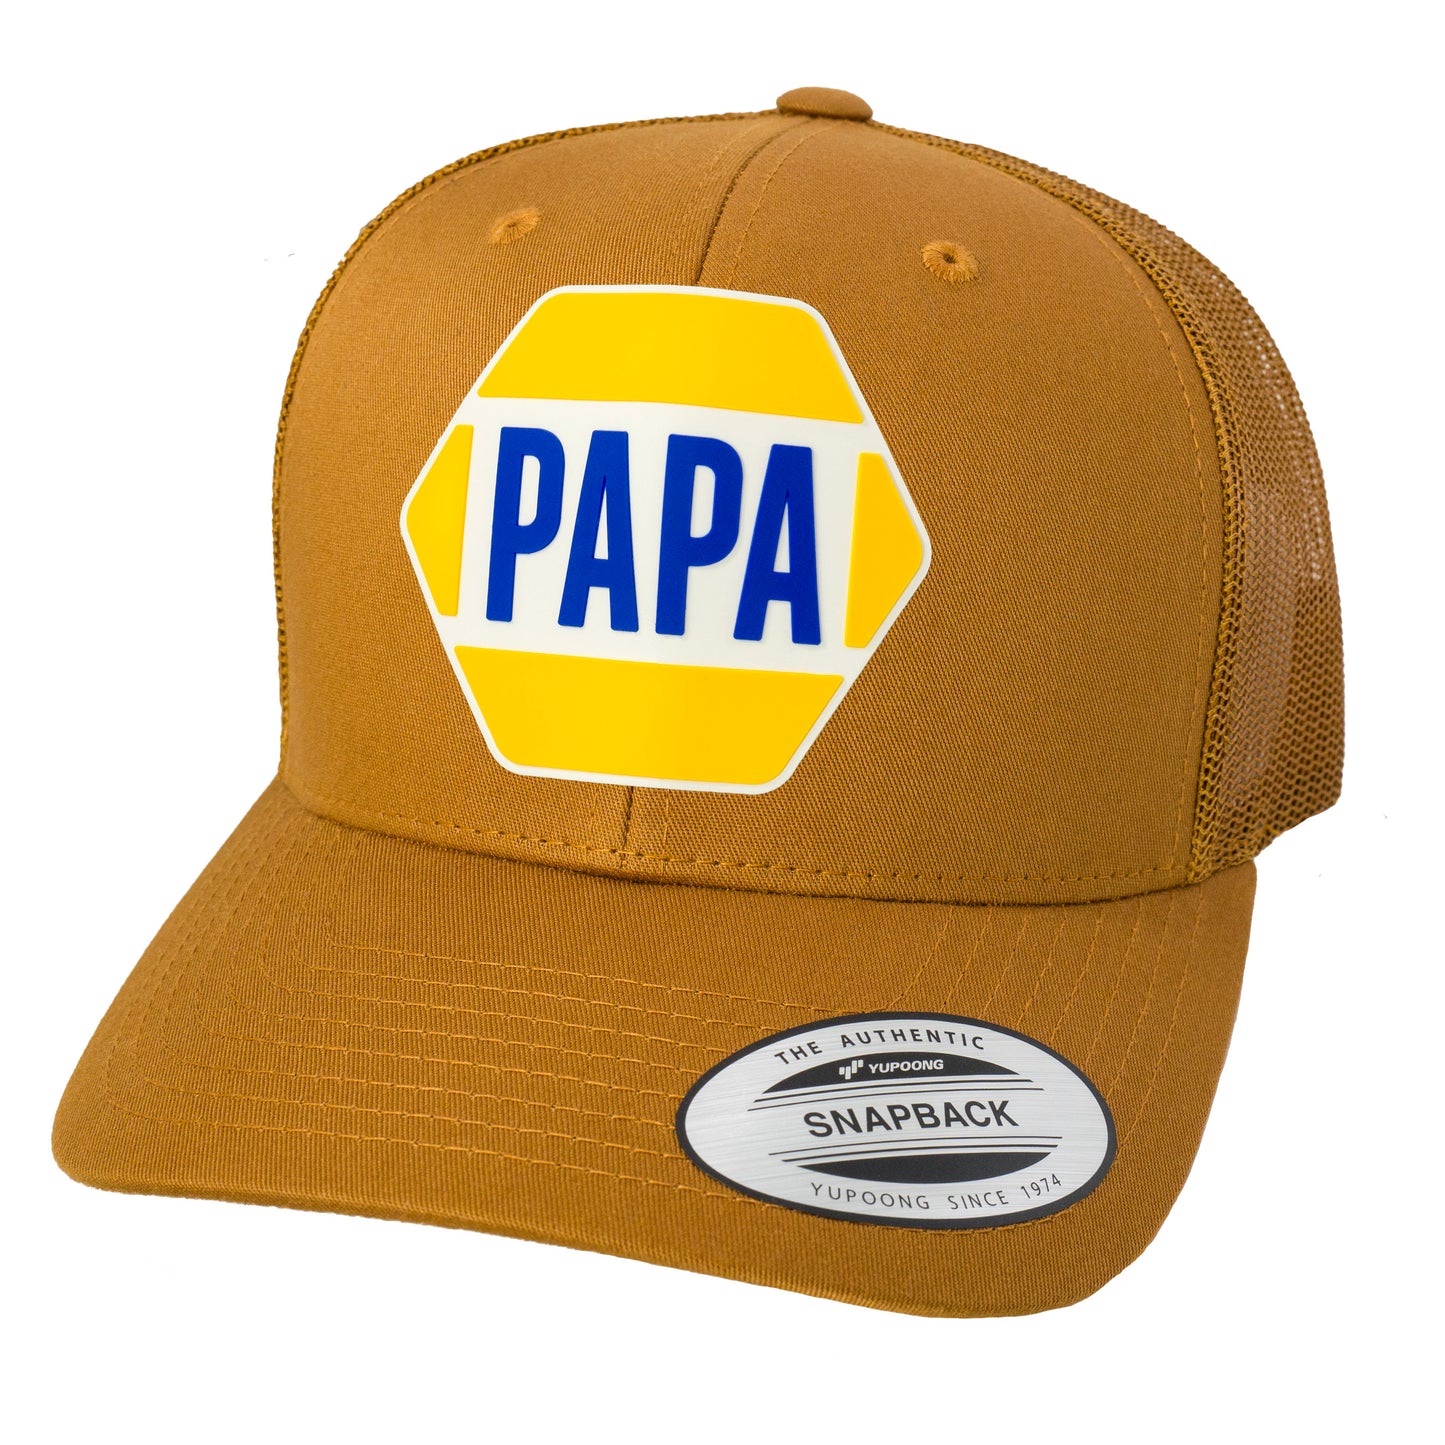 PAPA Know How 3D Classic YP Snapback Trucker Hat- Caramel - Ten Gallon Hat Co.